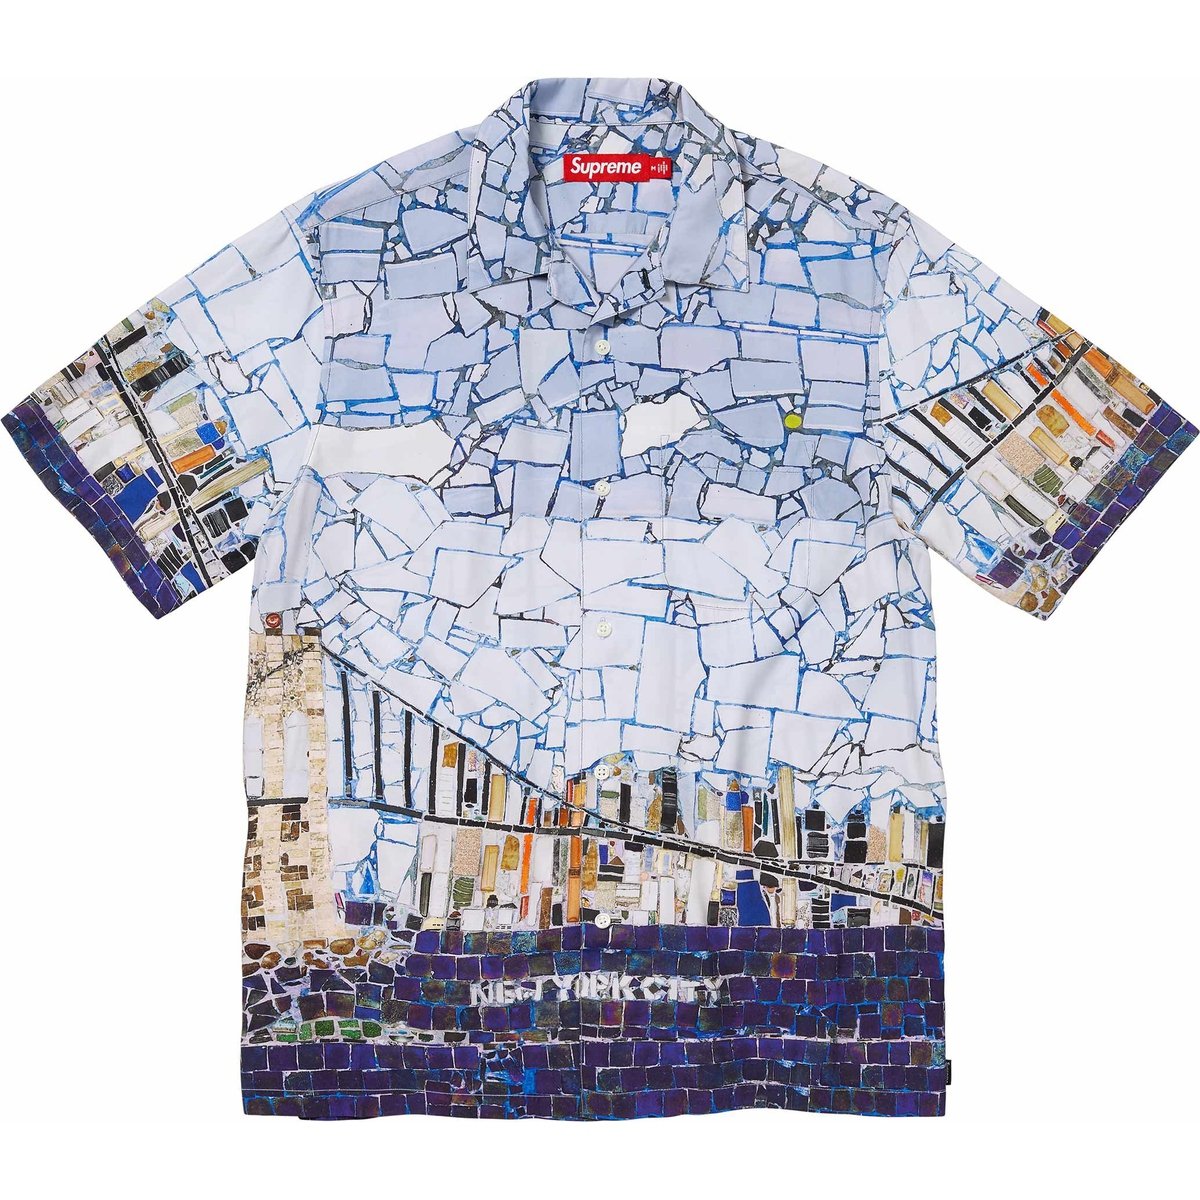 Supreme Mosaic S S Shirt released during spring summer 24 season